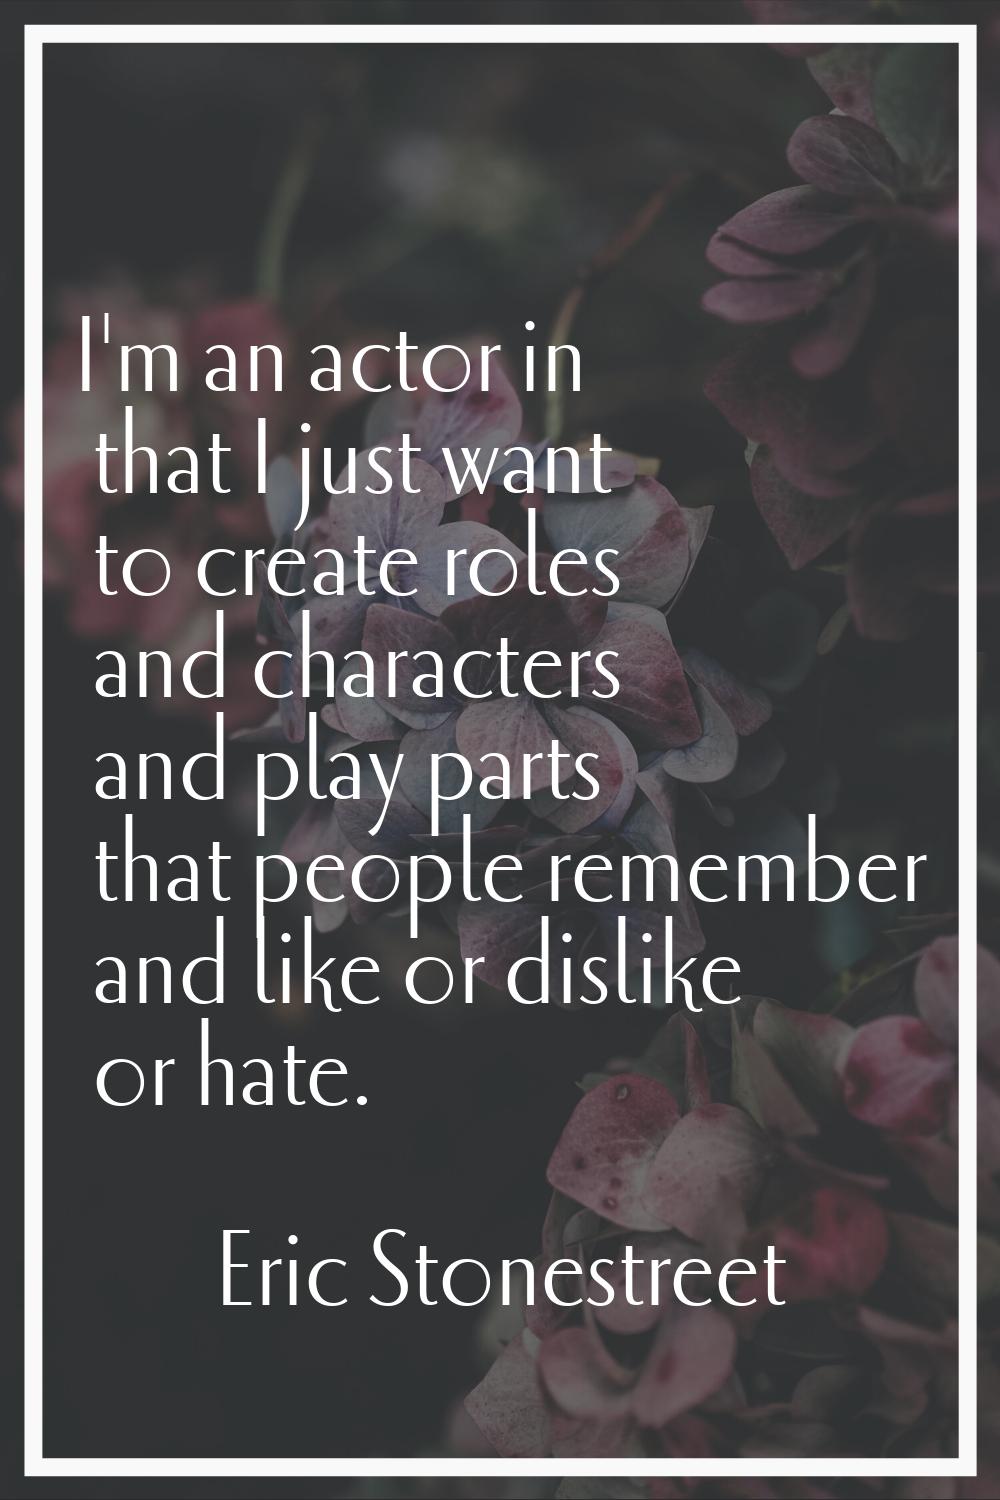 I'm an actor in that I just want to create roles and characters and play parts that people remember